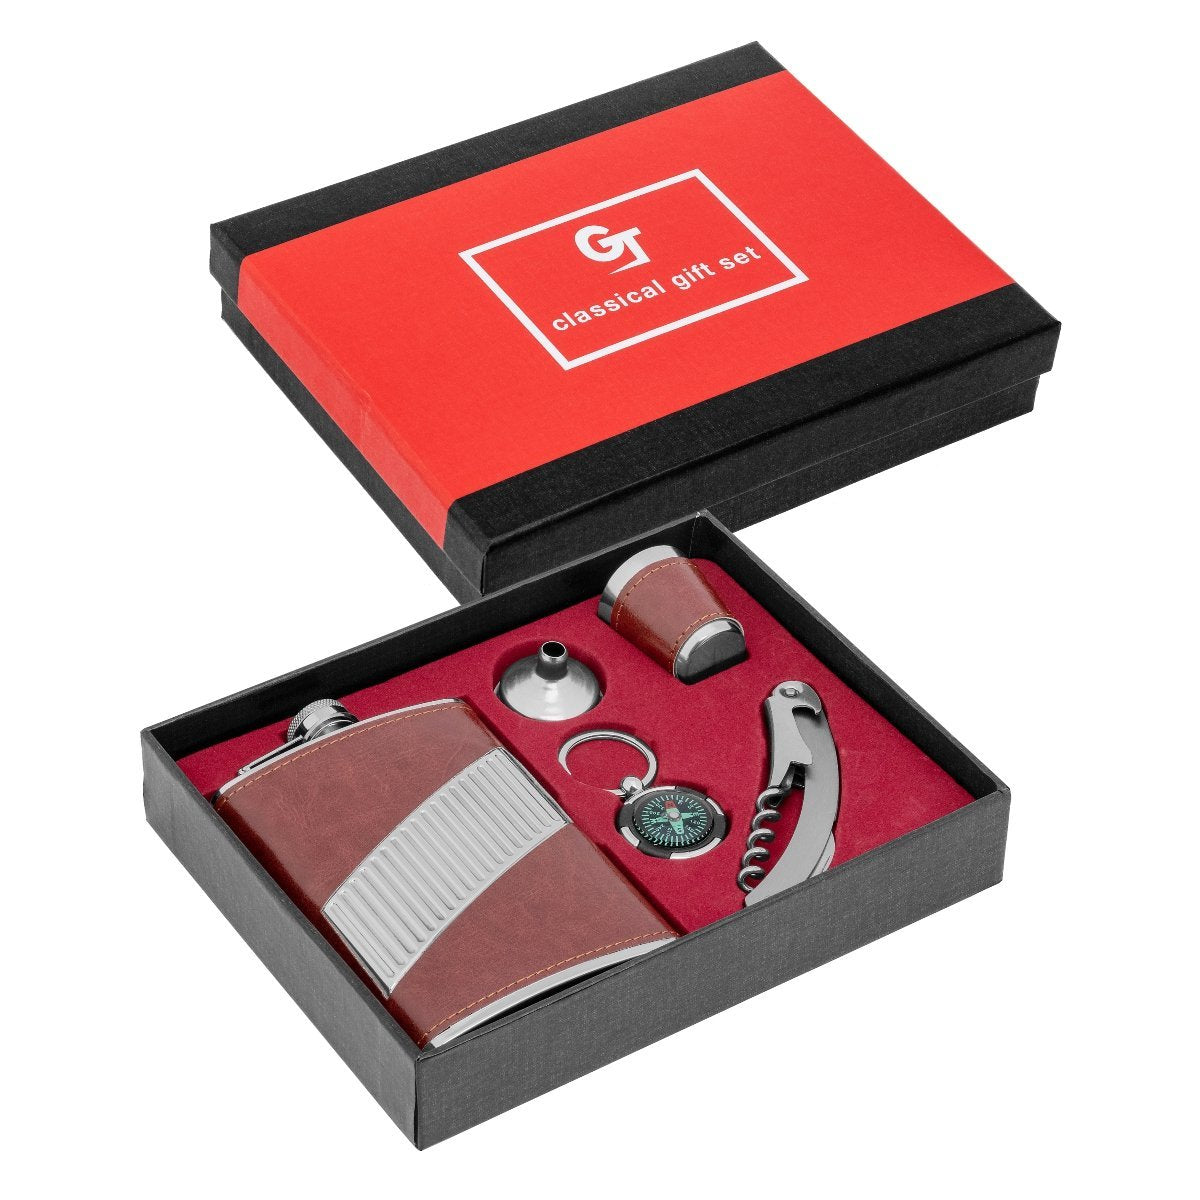 Stainless Steel Gift Set, 9 oz Hip Flask and Shot Glass